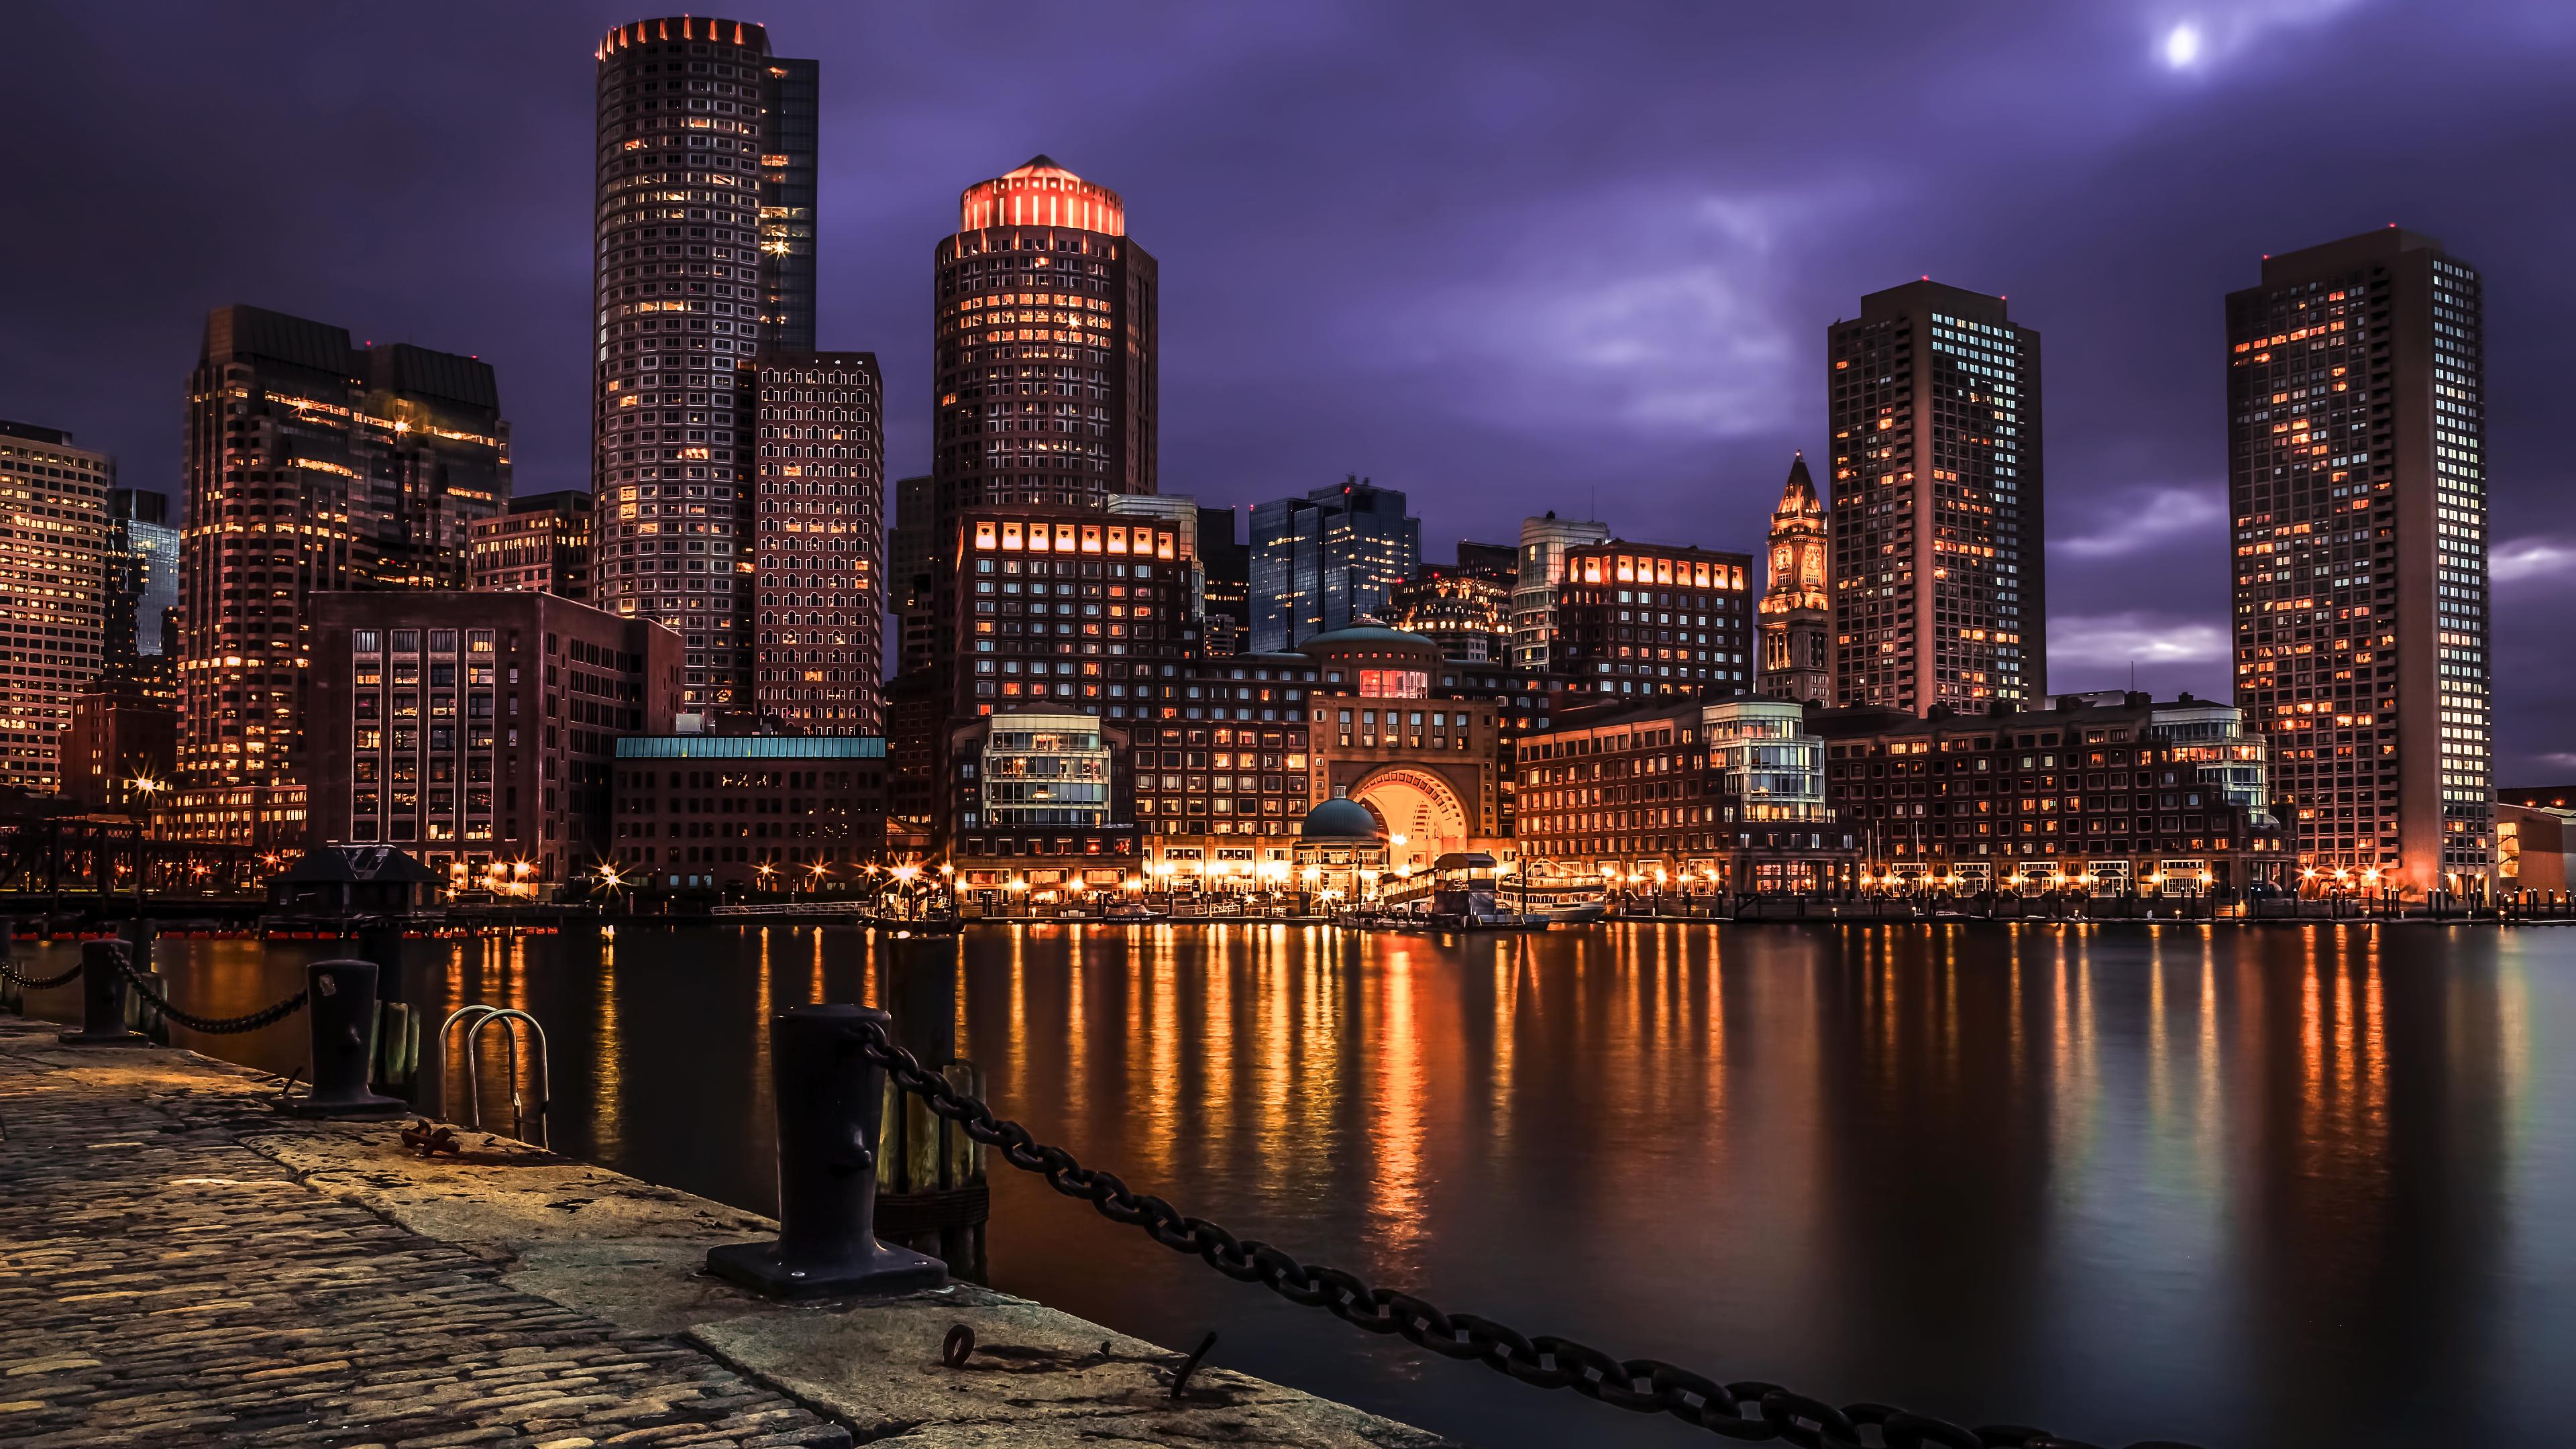 Boston 4K wallpaper for your desktop or mobile screen free and easy to download